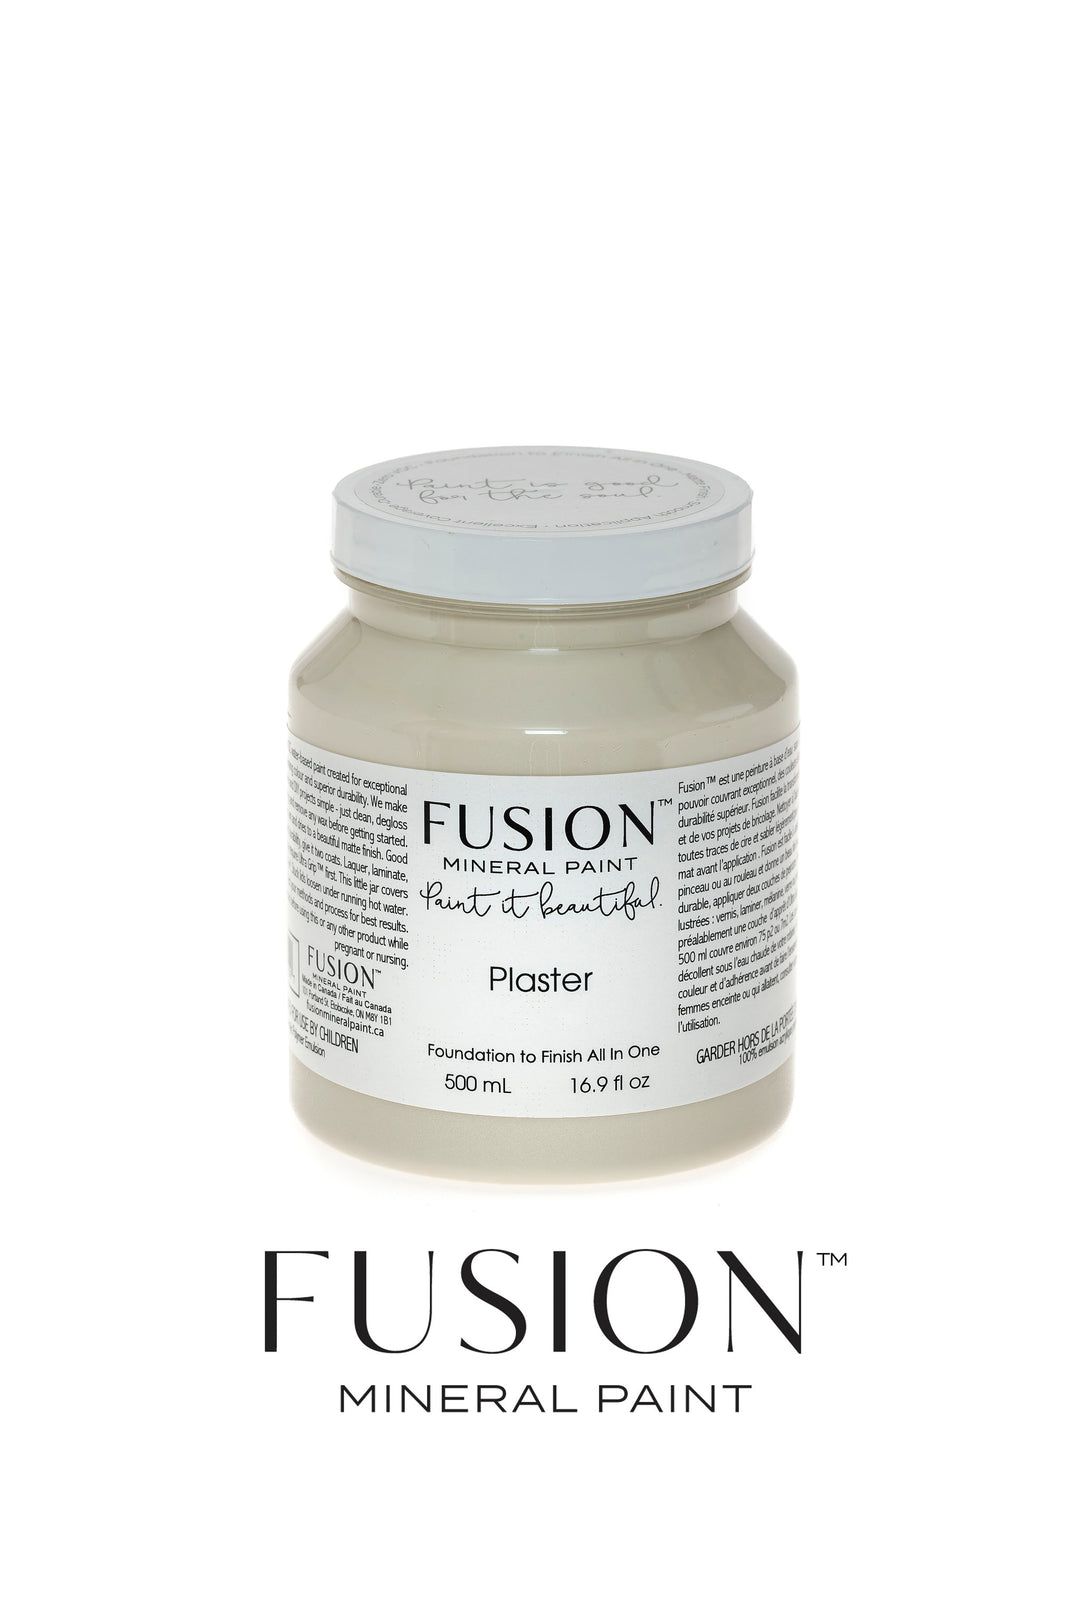 Fusion Mineral Paint-PLASTER (Pint) - Acosta's Home